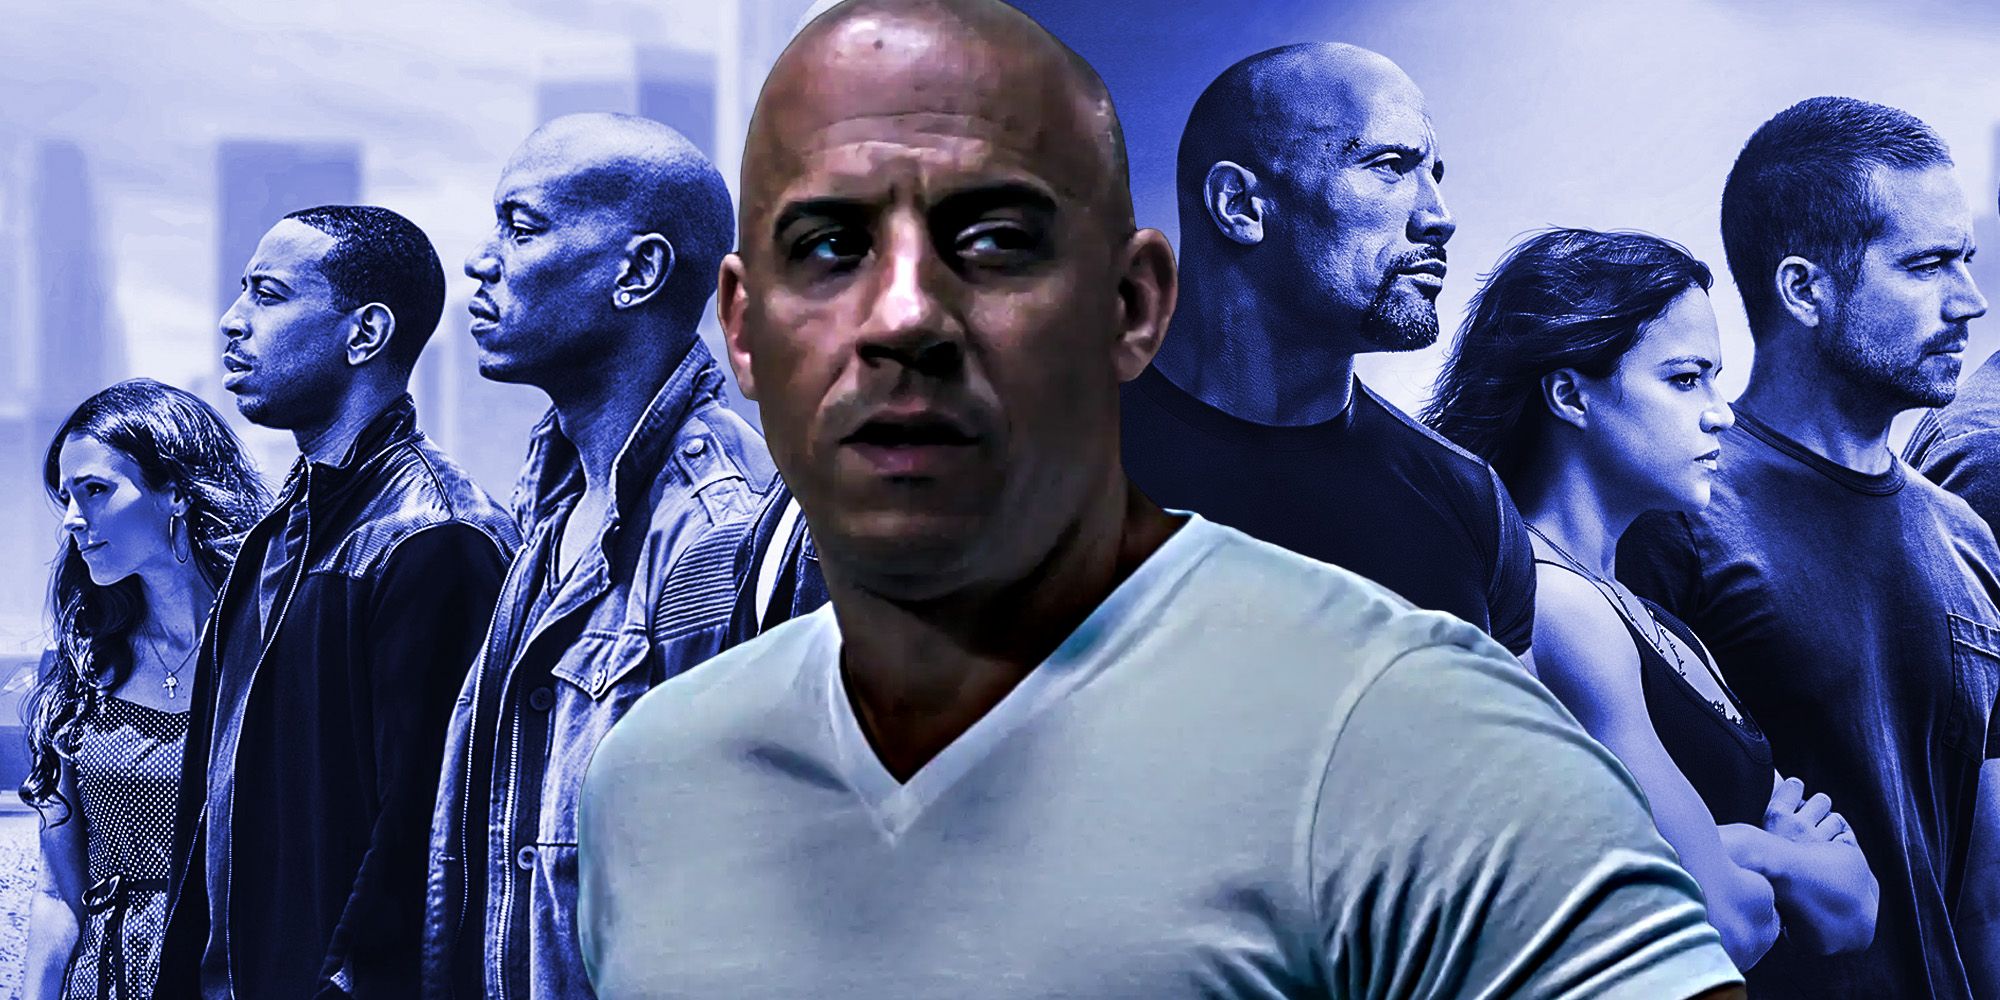 Vin diesel Dominic Toretto Fast and furious 10